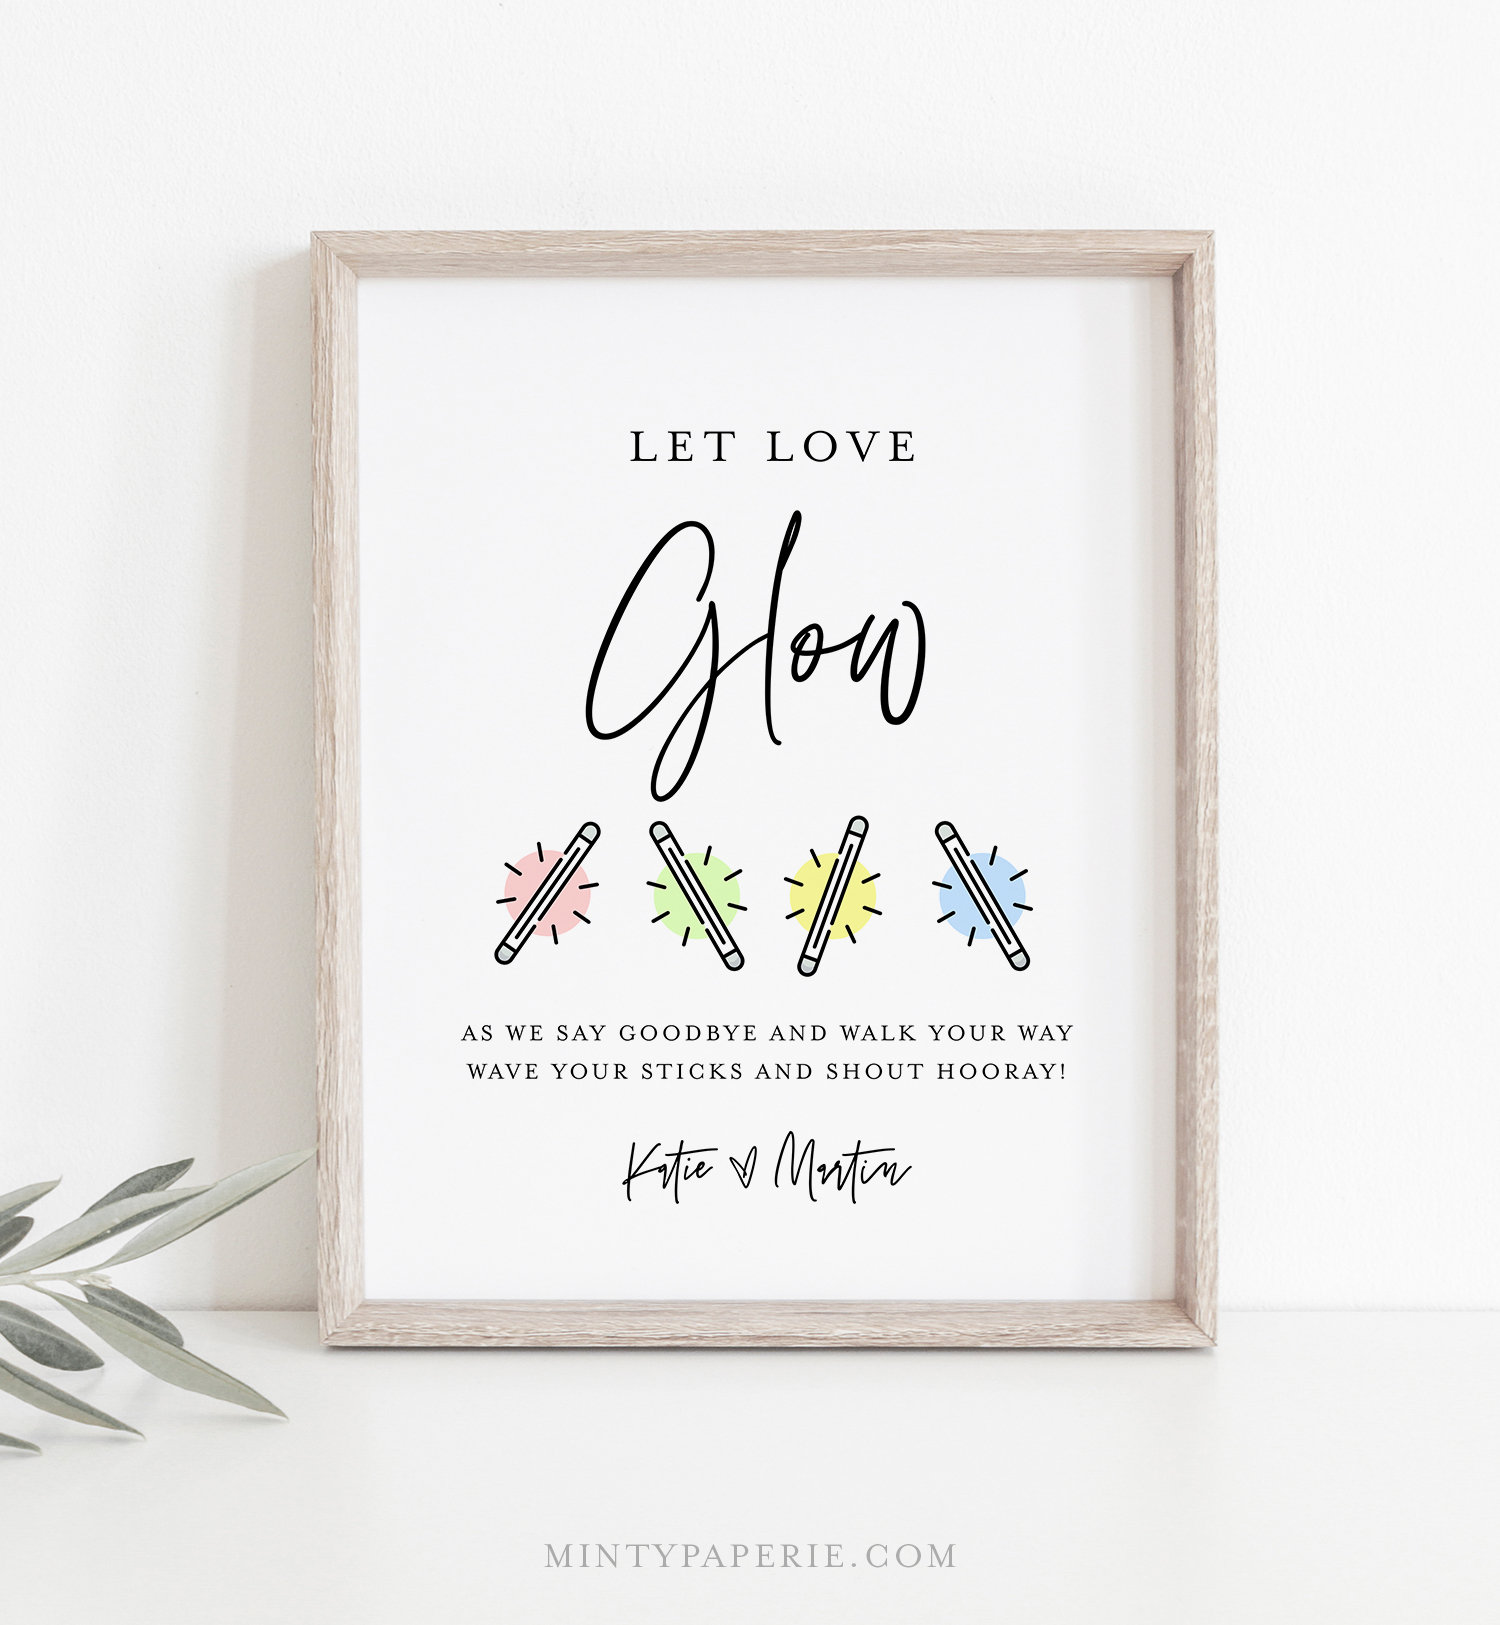 Glow Stick Wedding Send Off Sign, Let Love Glow, Minimalist Modern,  Editable Template, Printable, Instant Download, Templett, 8x10 #0009-71S